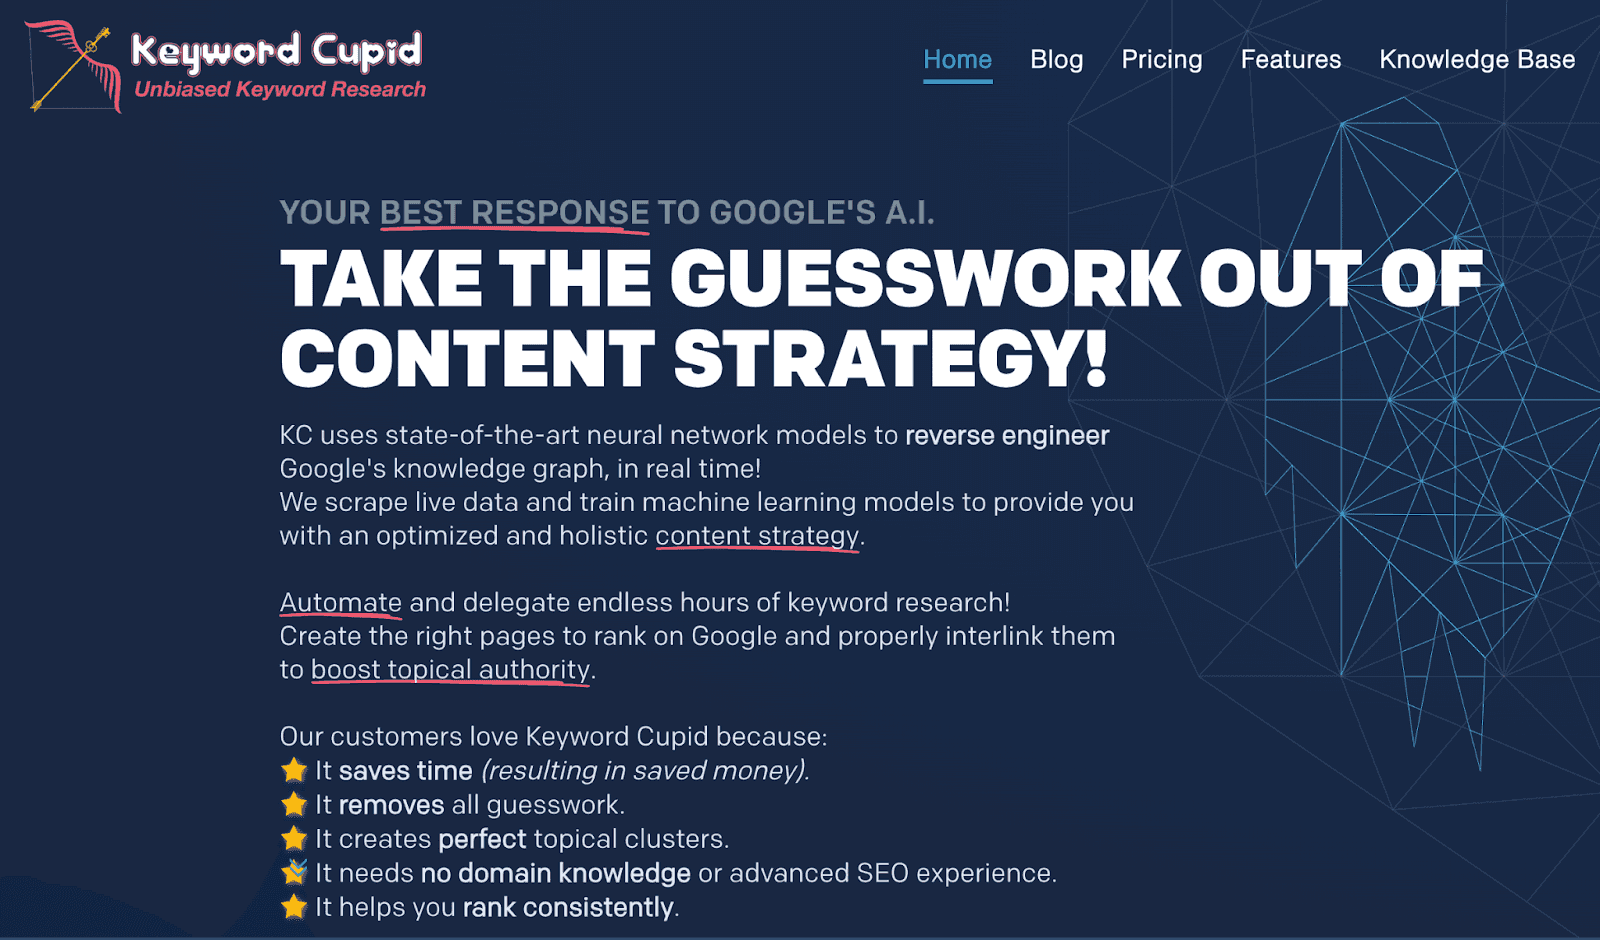 Keyword Cupid website - Take the guesswork out of content strategy